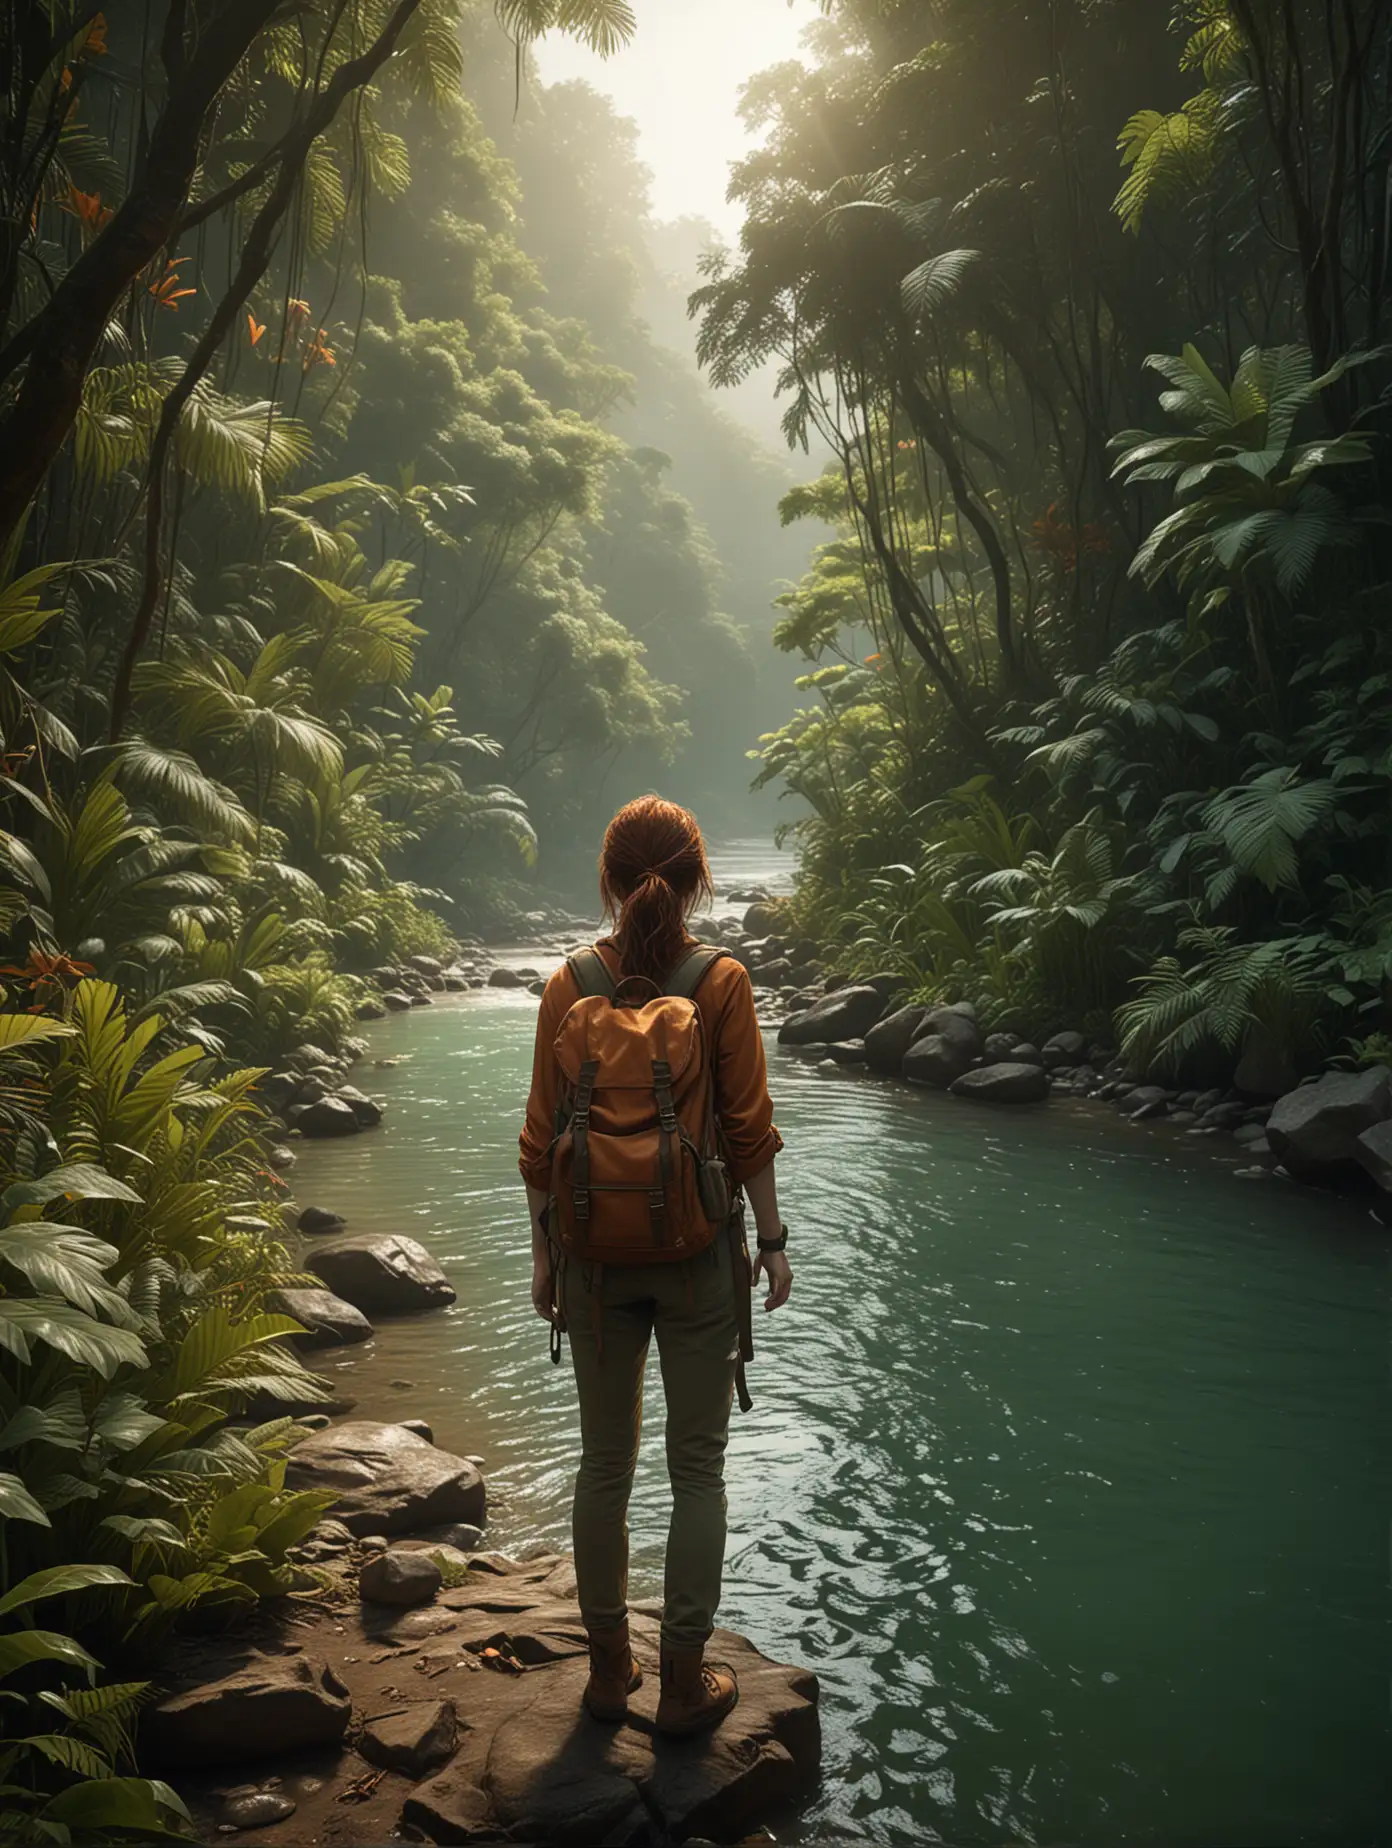 Woman with backpack looking at a river, styled in mysterious jungle, dark orange and light emerald colors, secluded environment, nature inspired imagery, National Geographic photo, Unreal Engine 5, sensitivity to the natural world